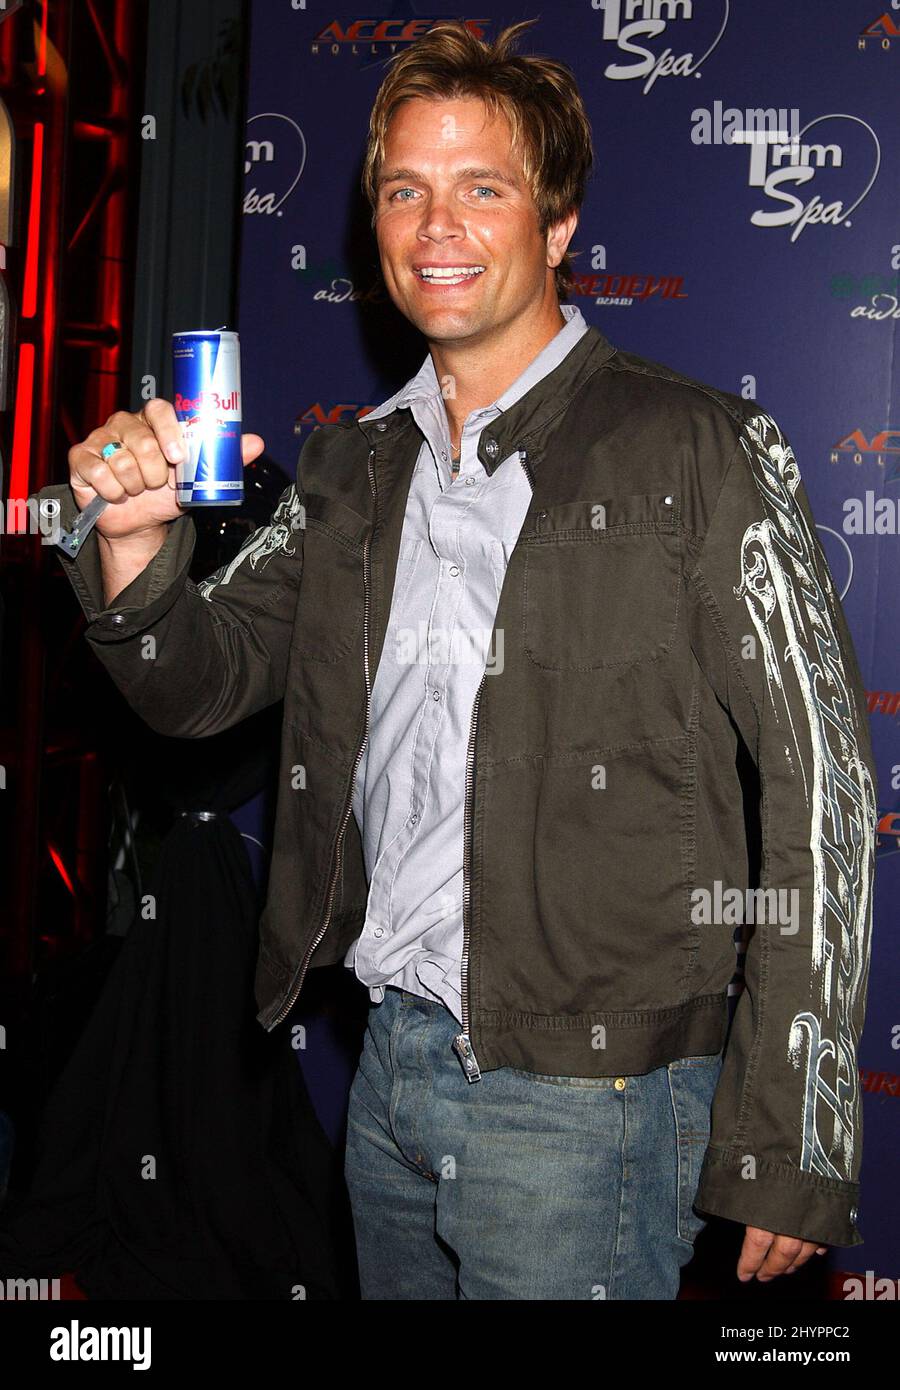 DAVID CHOKACHI ATTENDS THE ACCESS HOLLYWOOD PRE-Super Bowl PARTY HELD AT THE STU SEGALL STUDIOS, SAN DIEGO PICTURE: UK PRESS Stock Photo